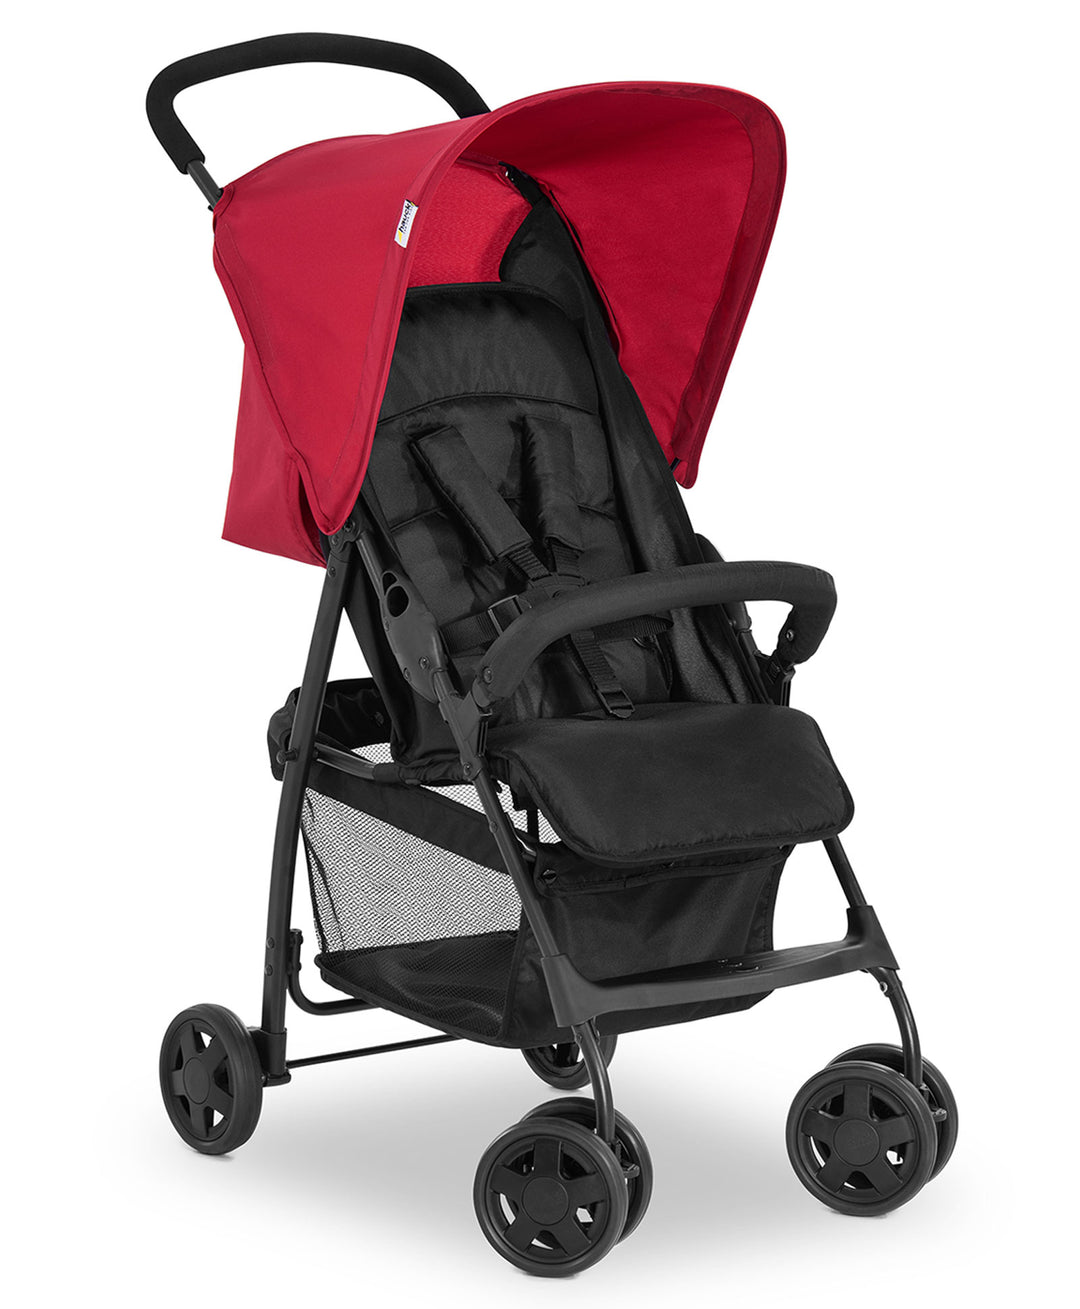 Hauck Stroller Sport With Canopy